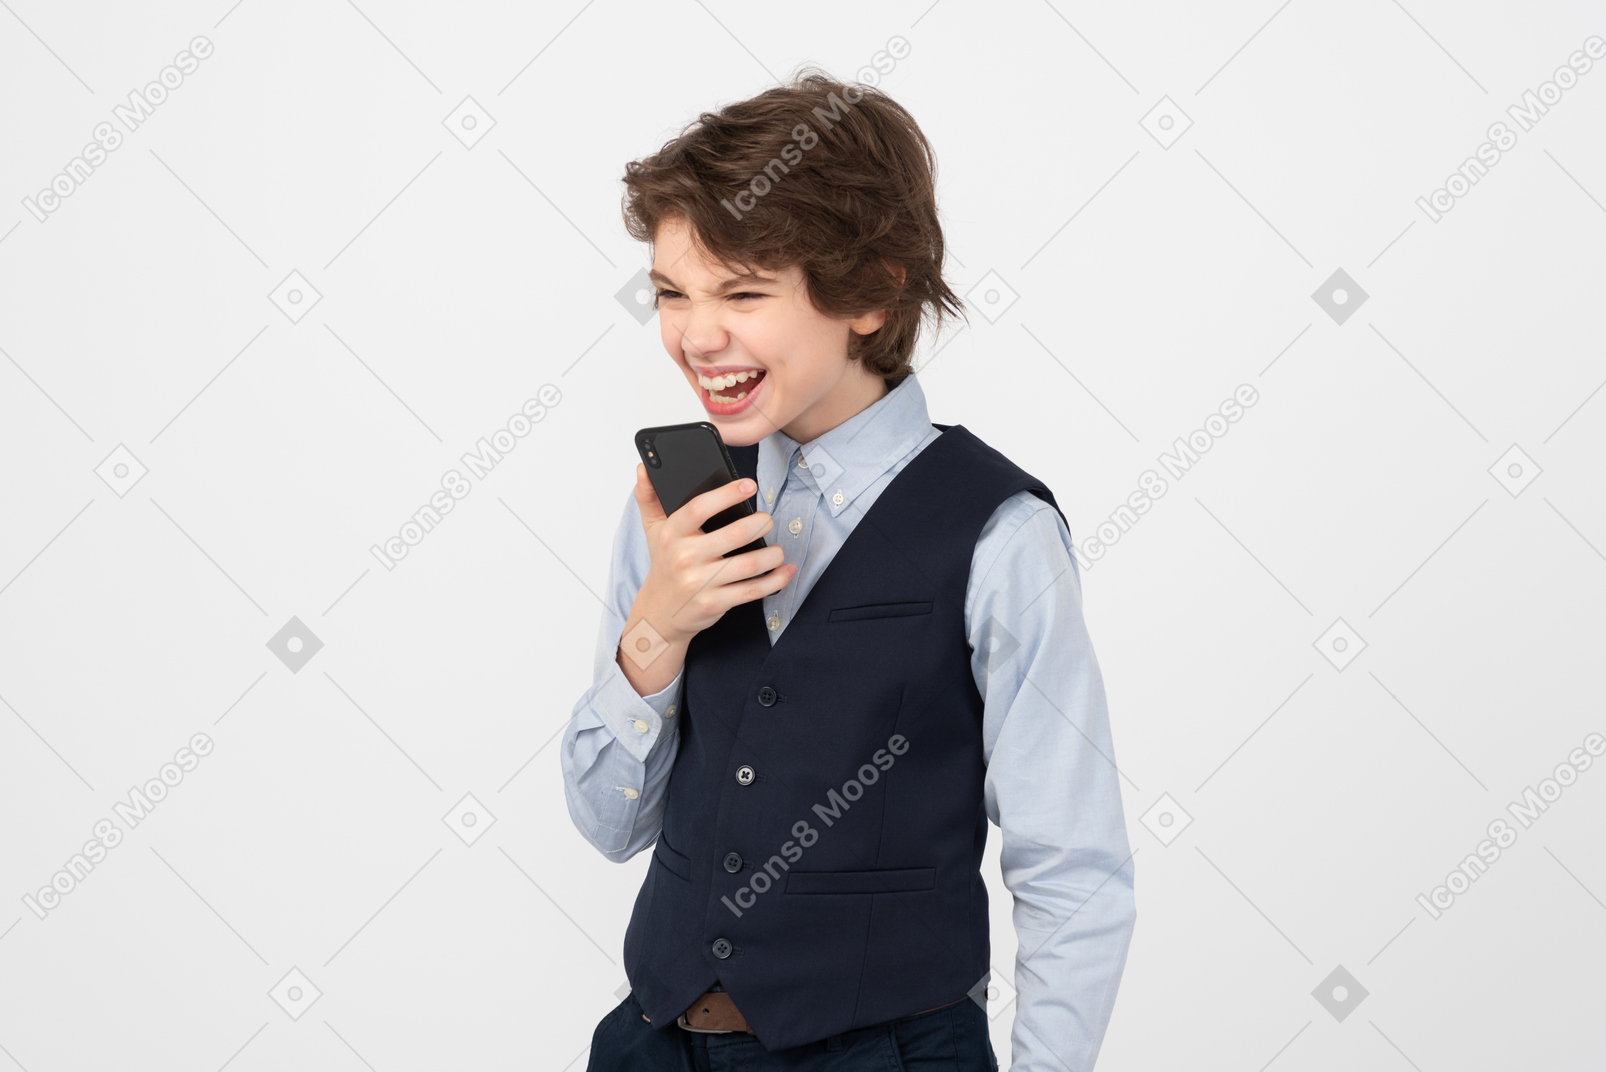 Angry schoolboy using his smartphone